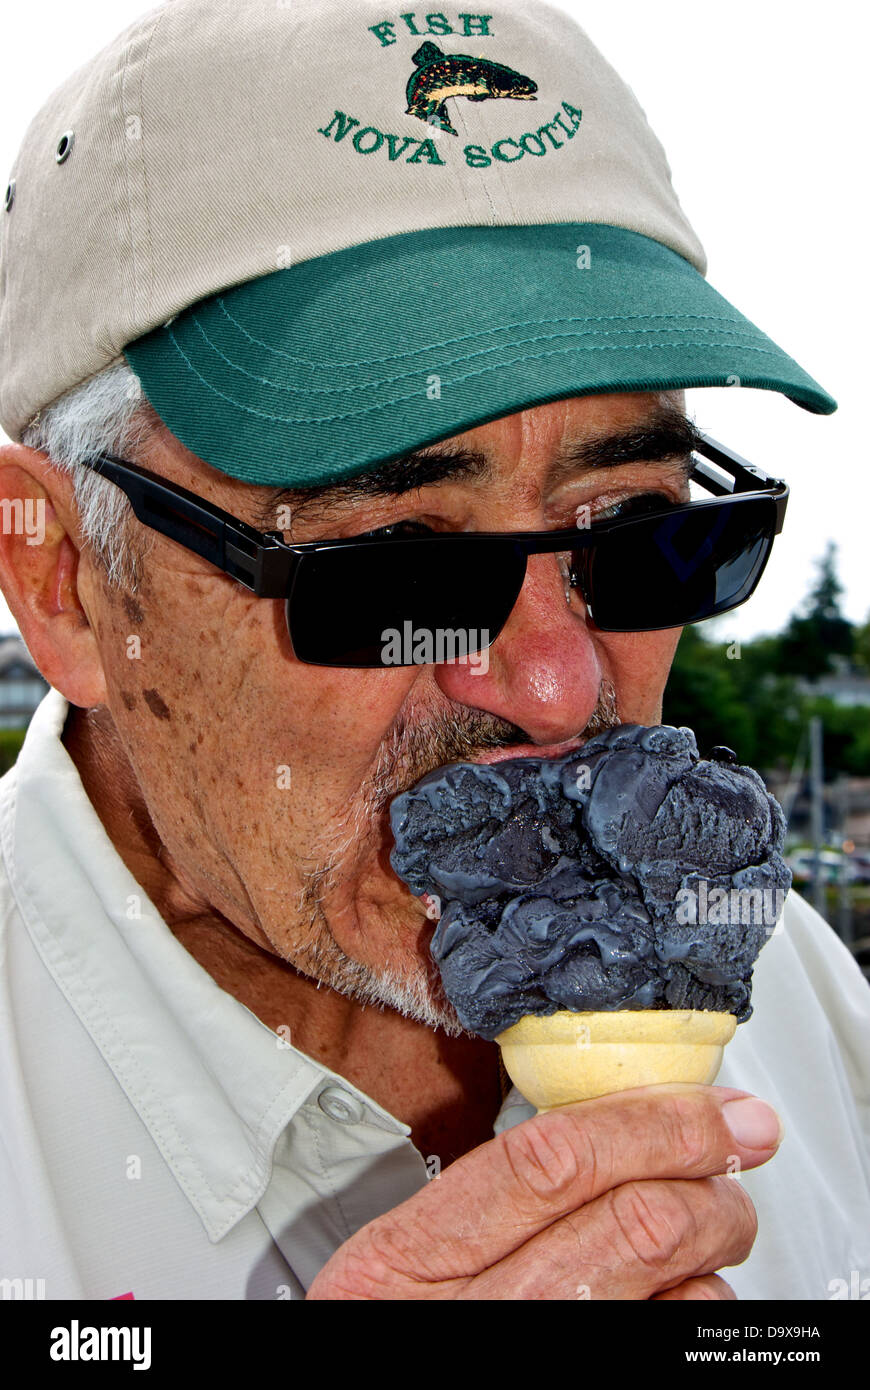 Man eating baby liquorice ice cream cone Discovery Fishing Pier food concession stand Stock Photo